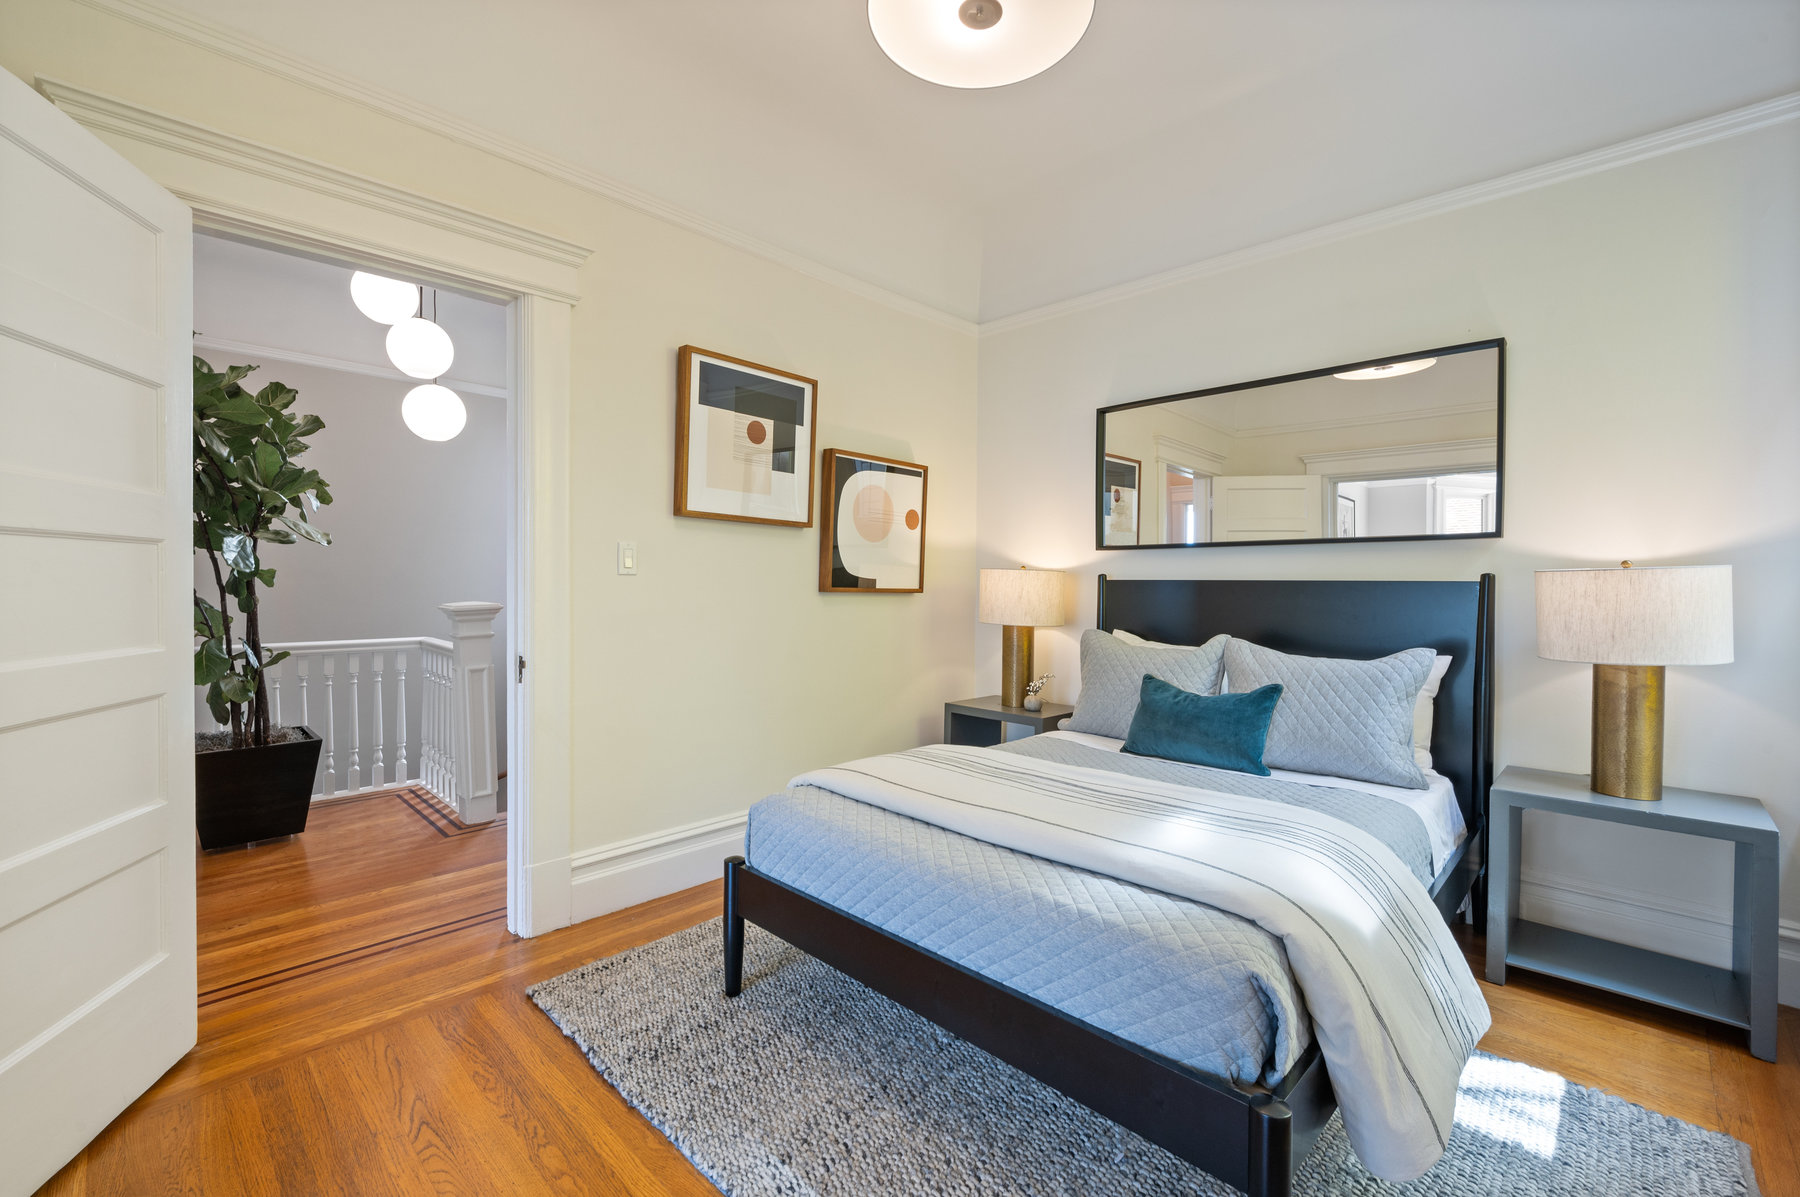 Property Photo: First bedroom in upper unit. Queen bed with bedside tables on each side of bed. Harwood floors. 